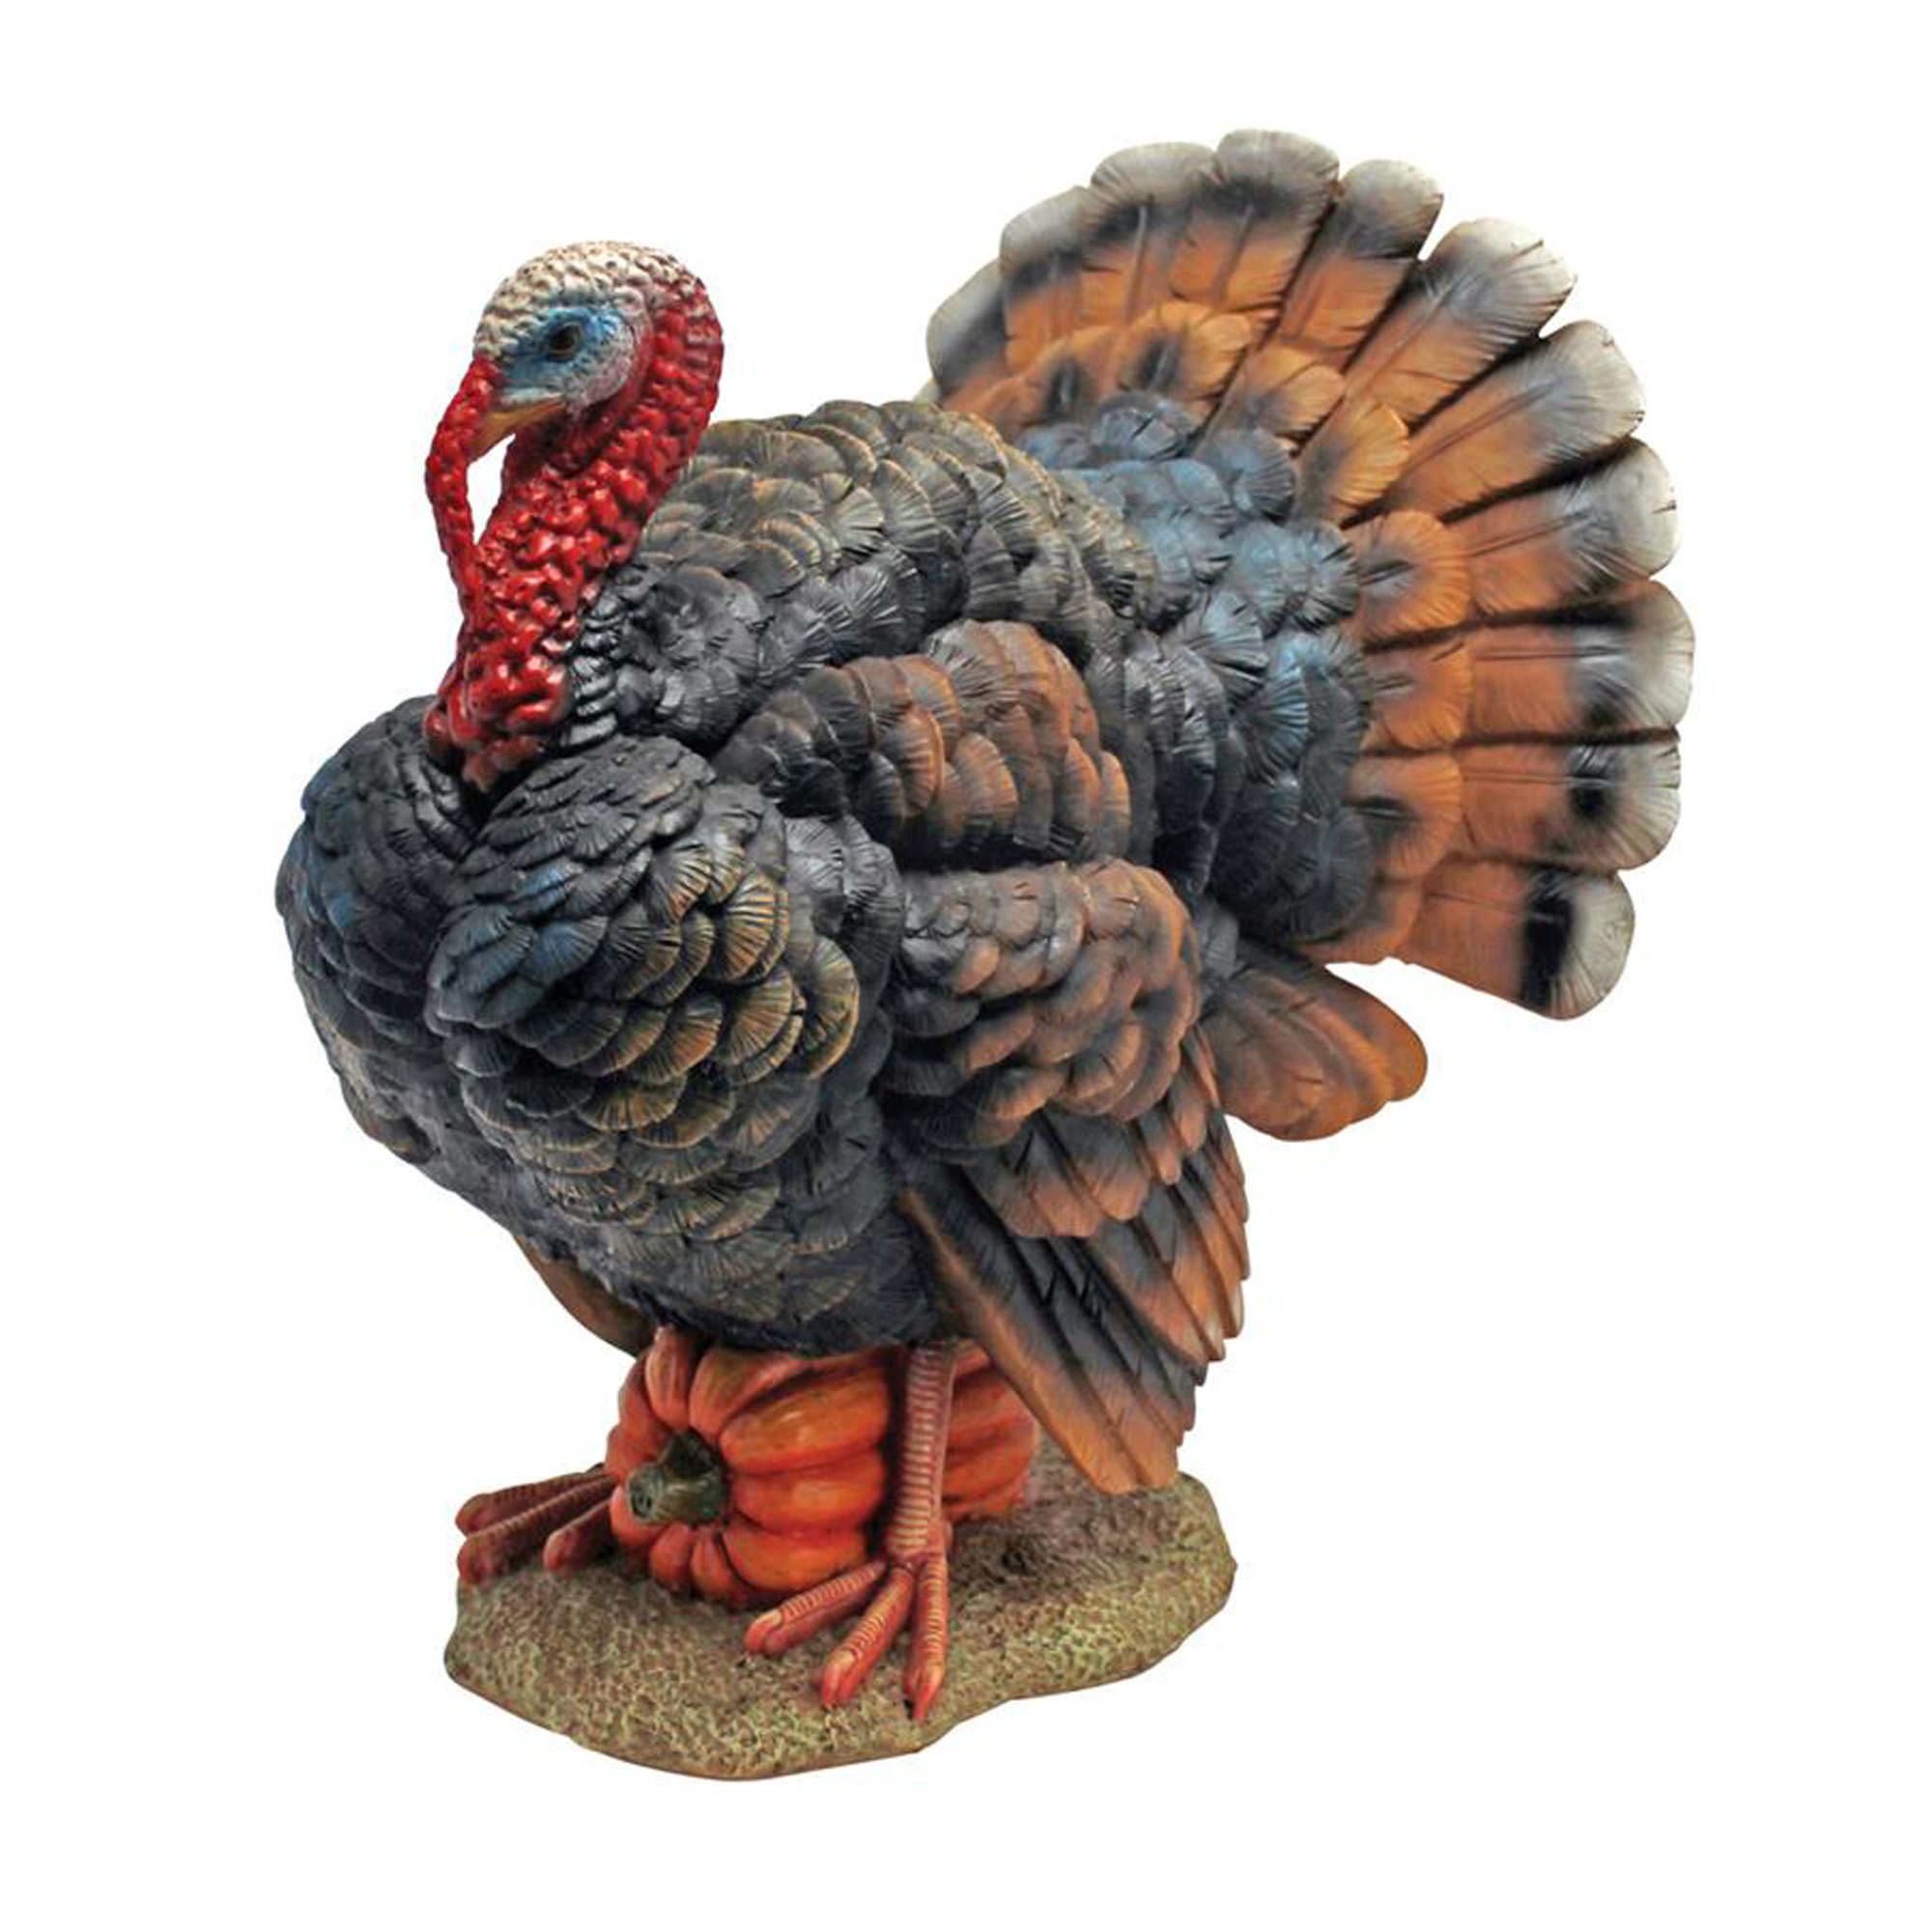 Outdoor Living and Style 12" North American Turkey Fall Harvest Outdoor Garden Statue